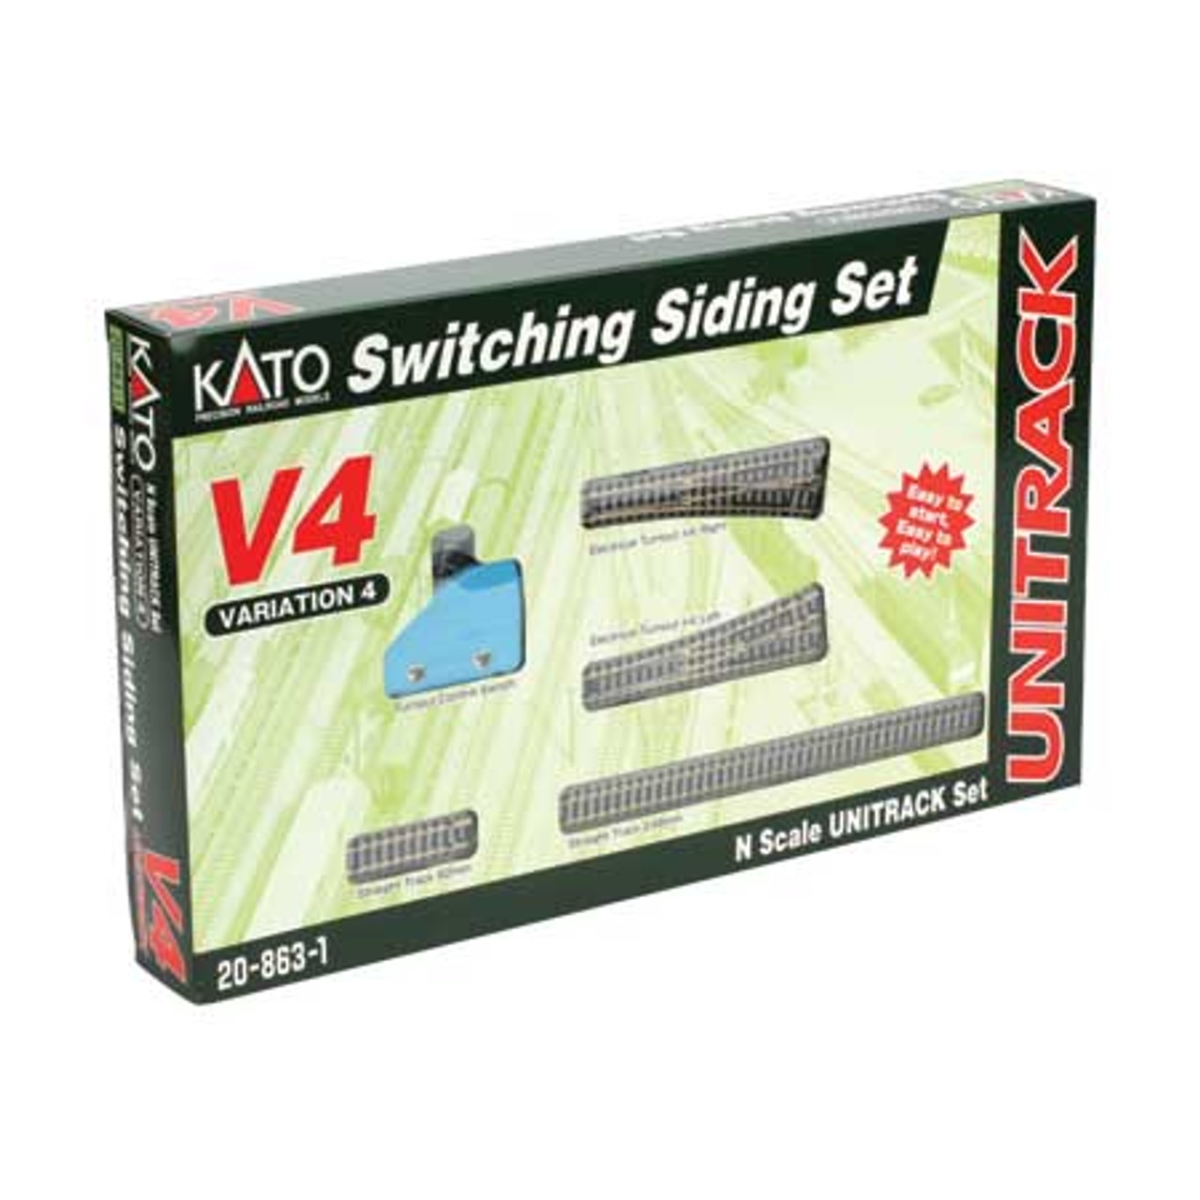 Picture of Kato KAT20-863 N Scale V4 Switching Siding Set